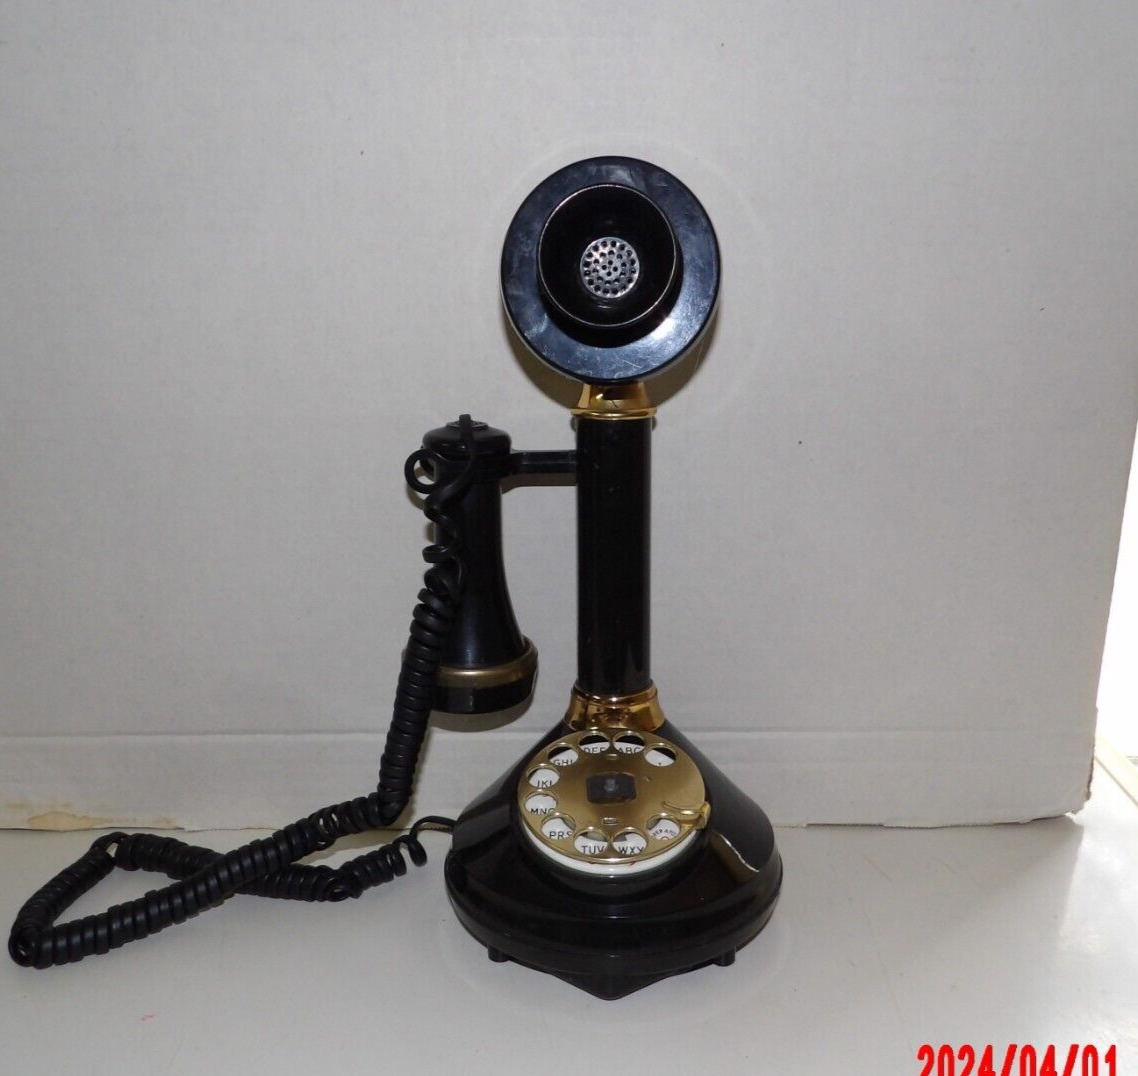  1973 Black Candlestick Vintage Rotary Phone Made By Telecommutions Corp.